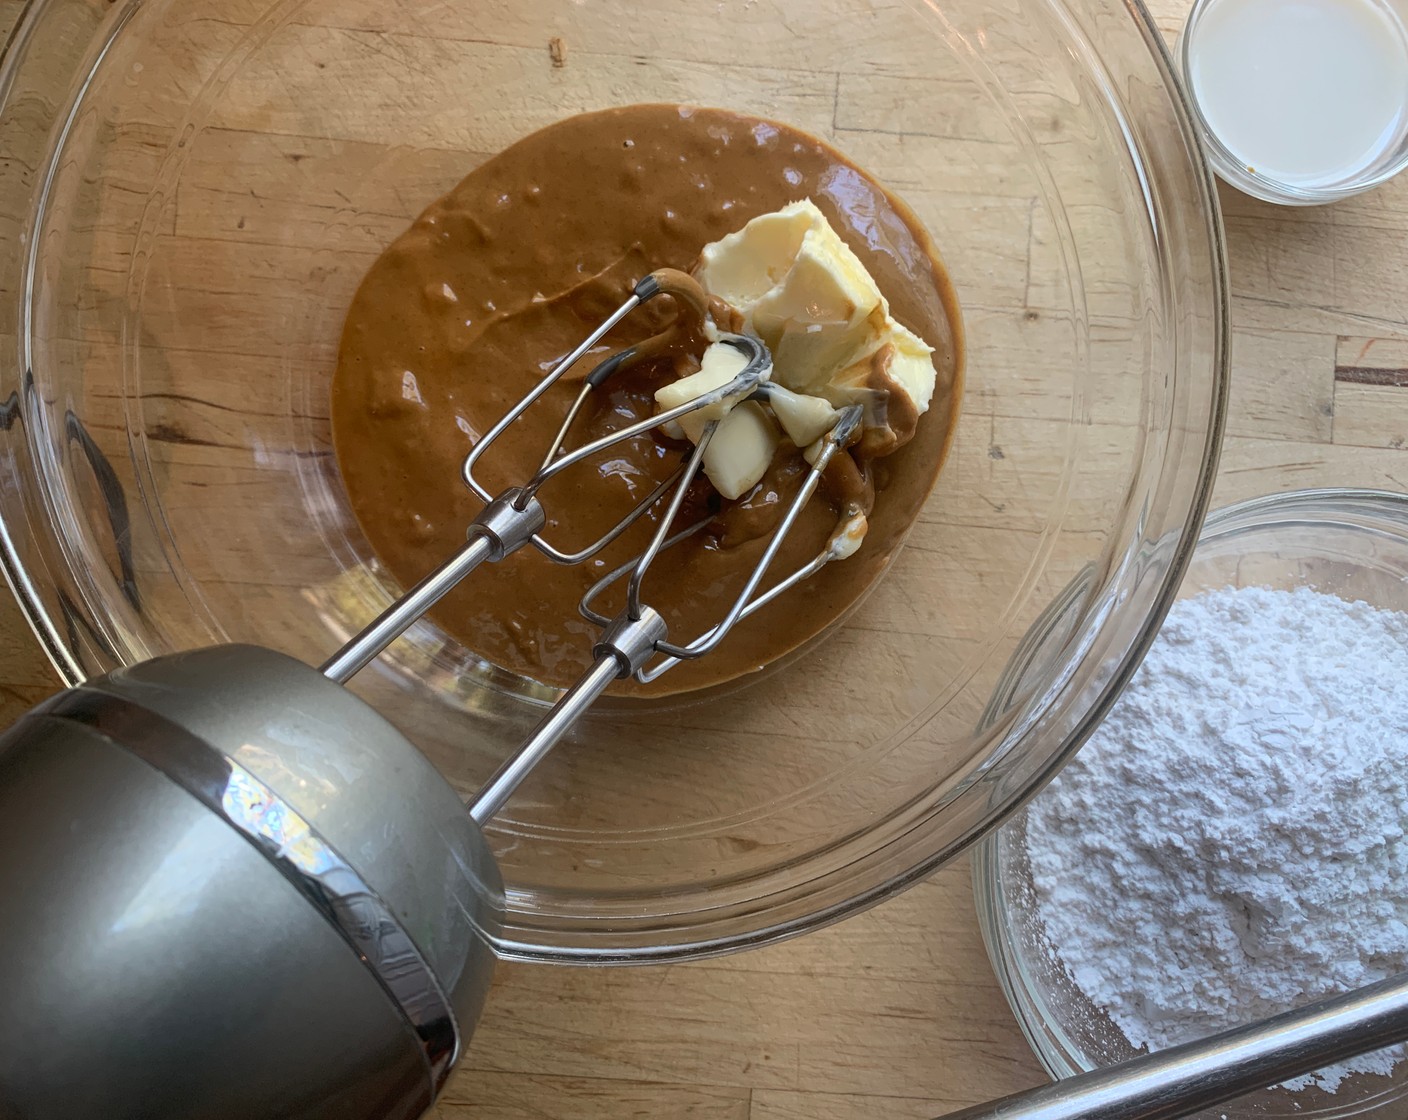 step 1 In a large mixing bowl, cream together the Creamy Peanut Butter (1 cup) and the Butter (1/3 cup) using an electric mixer, beat until well combined.